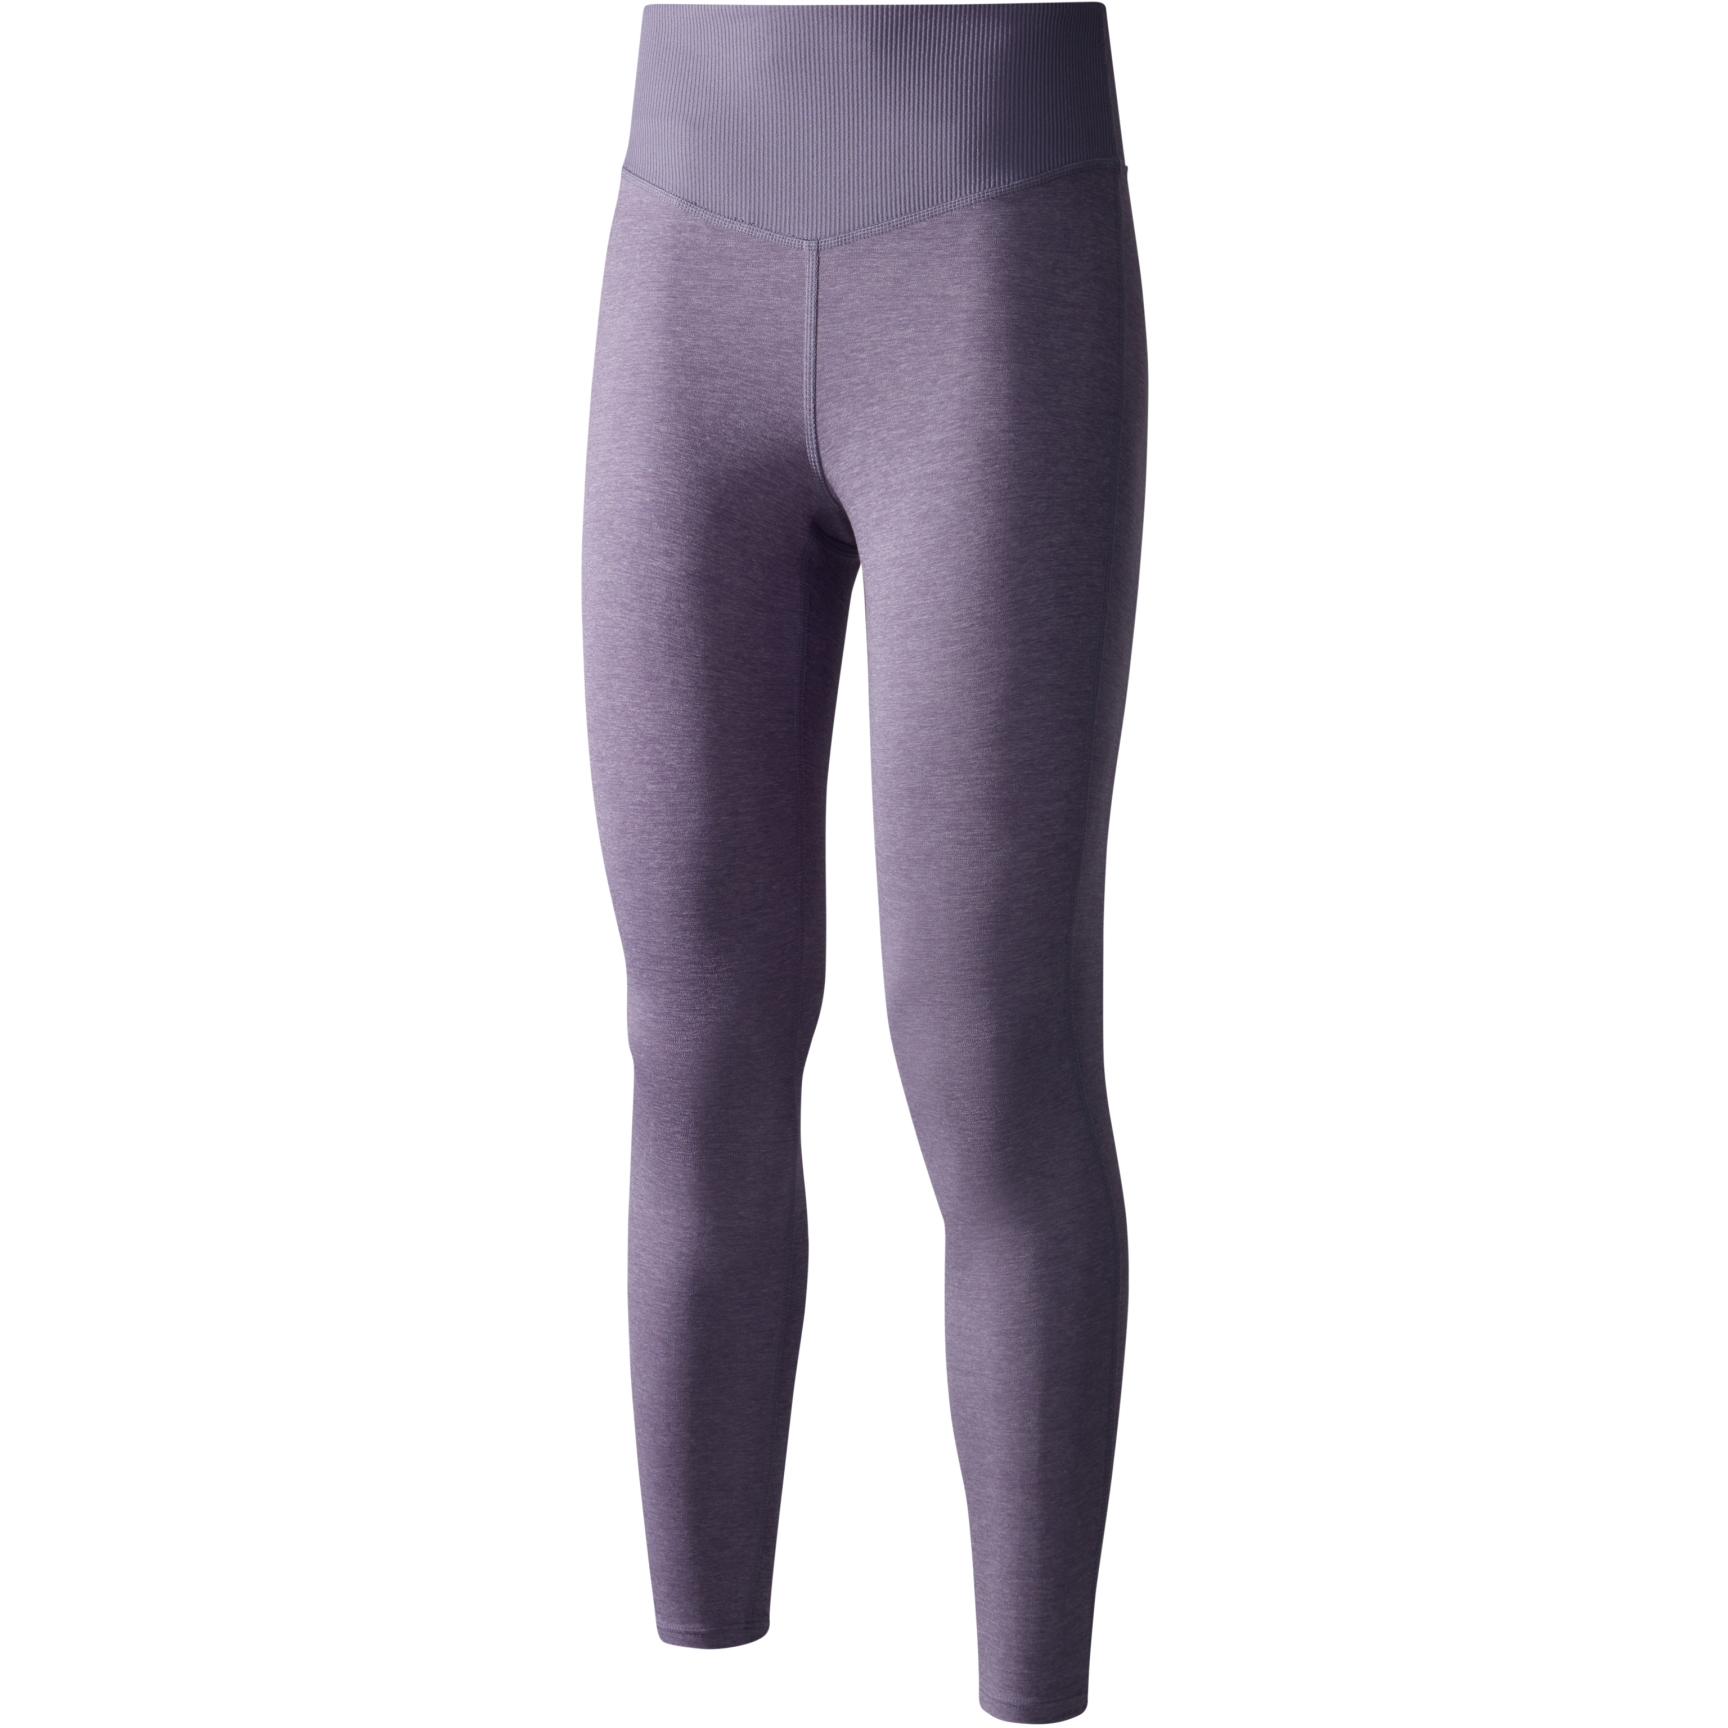 THE NORTH FACE Dune Sky 7/8 Tight - Women's